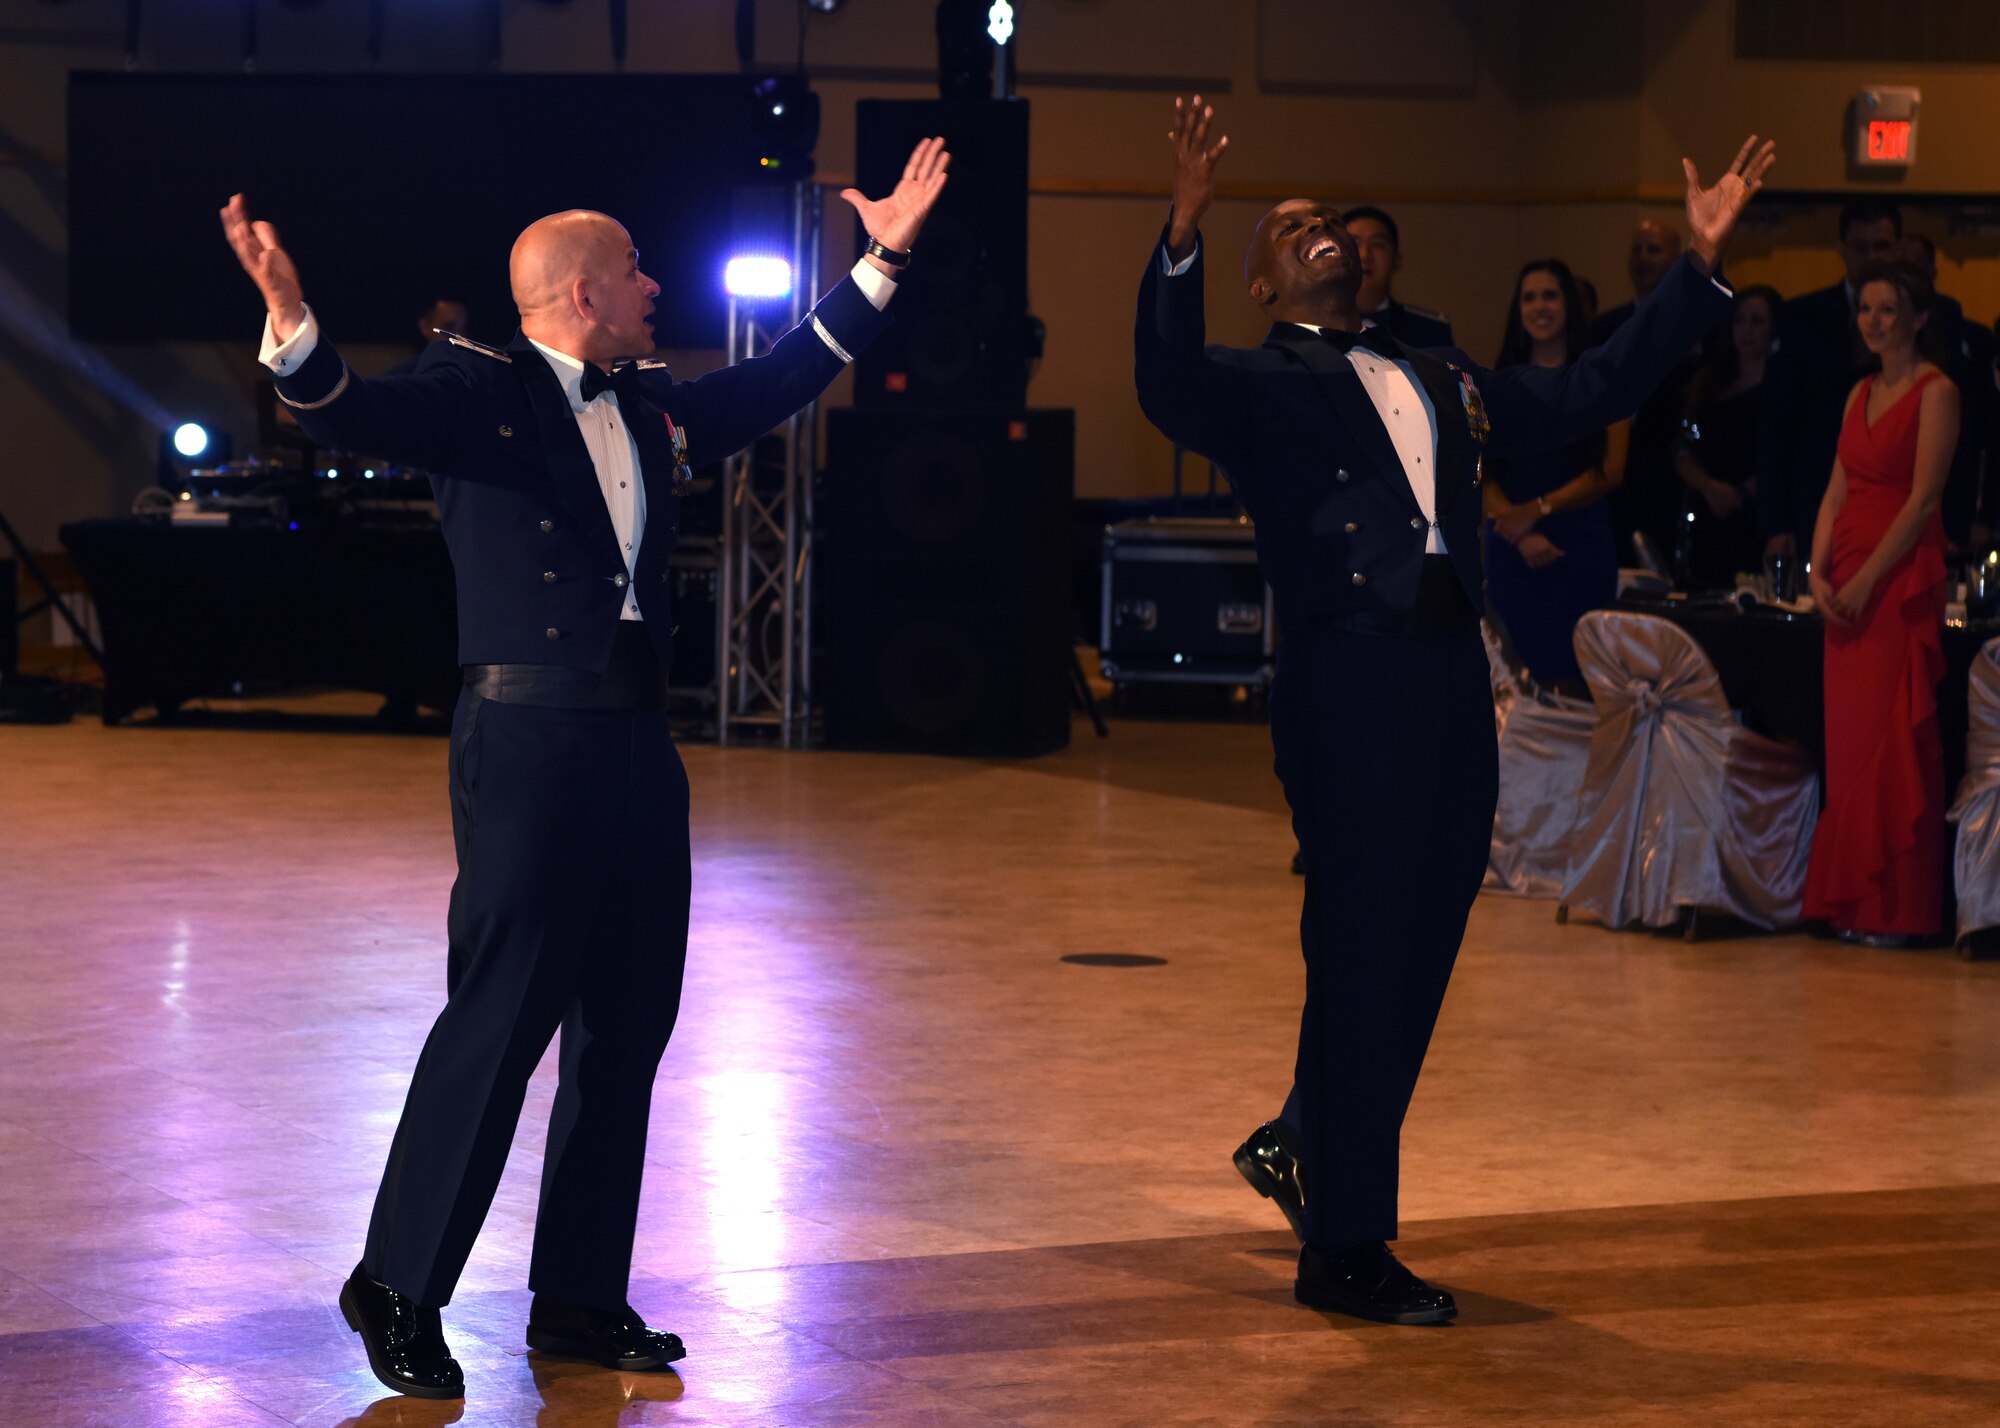 U.S. Air Force Col. Andres Nazario, 17th Training Wing commander, and Chief Master Sgt. Lavor Kirkpatrick, 17th Training Wing command chief, make an entrance at the 2019 Air Force Ball at the McNease Convention Center in San Angelo, Texas, September 7, 2019. The Air Force Ball’s theme was The Future of the Air Force. (U.S. Air Force photo by Airman 1st Class Ethan Sherwood/Released)